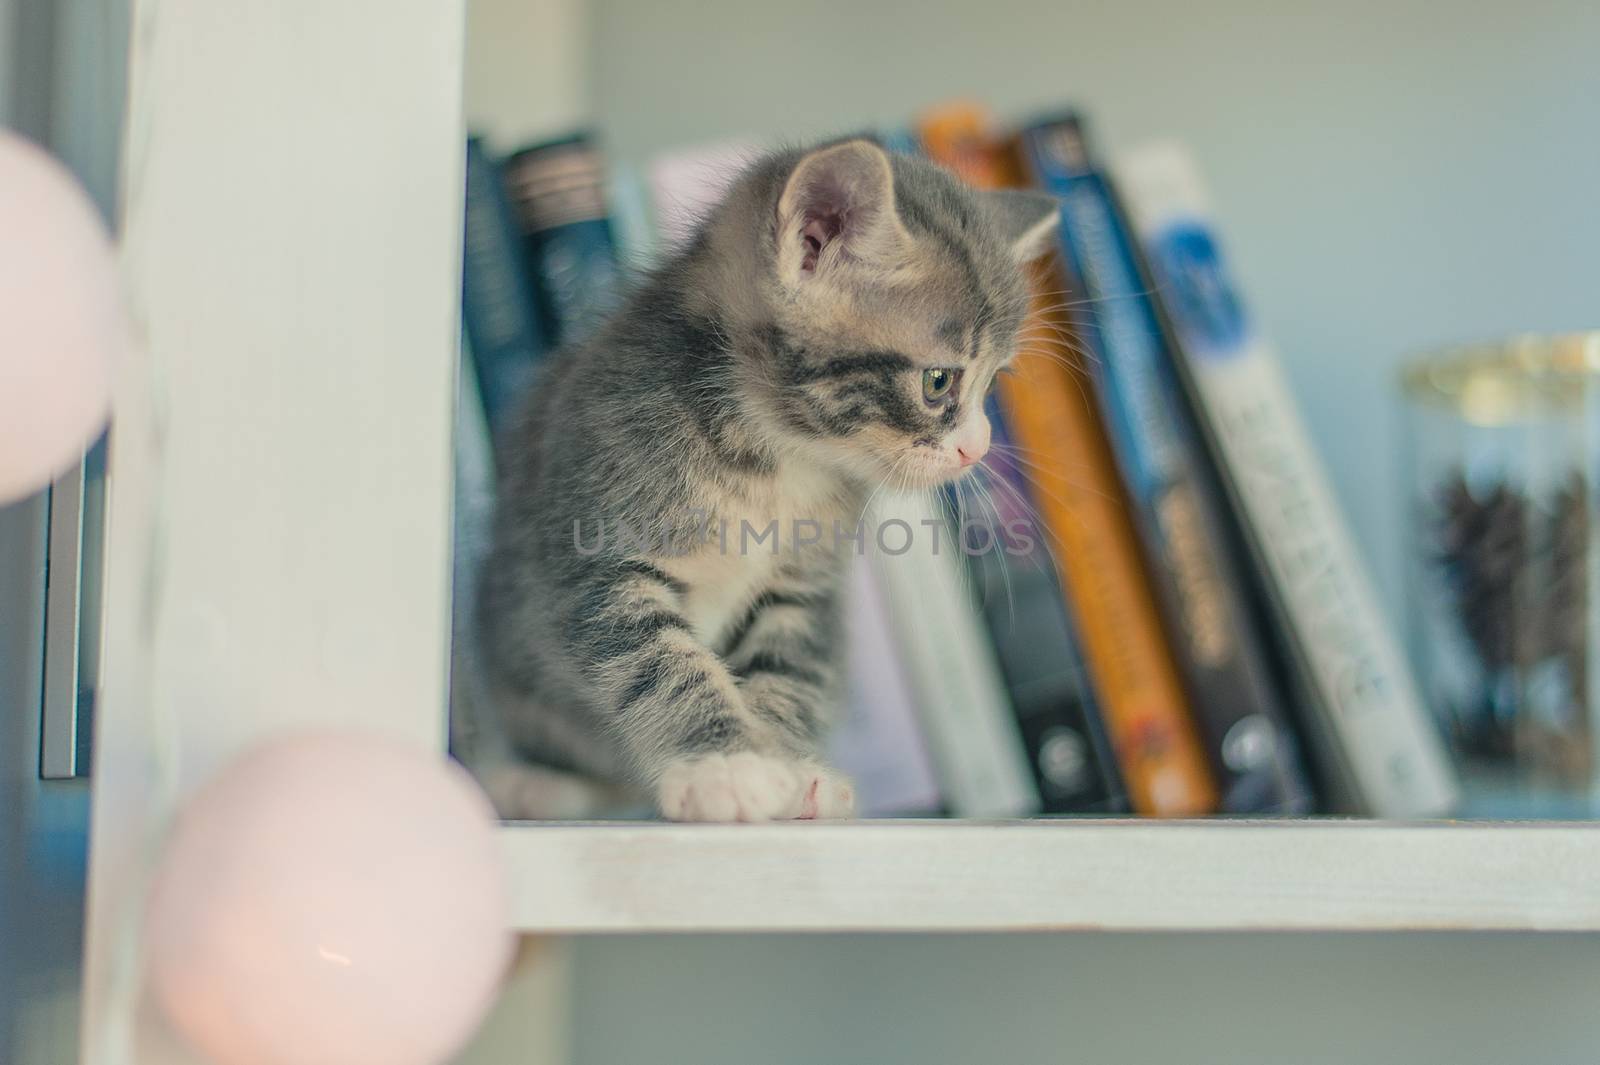 Gray kitten sits on shelves near books and round lamps.